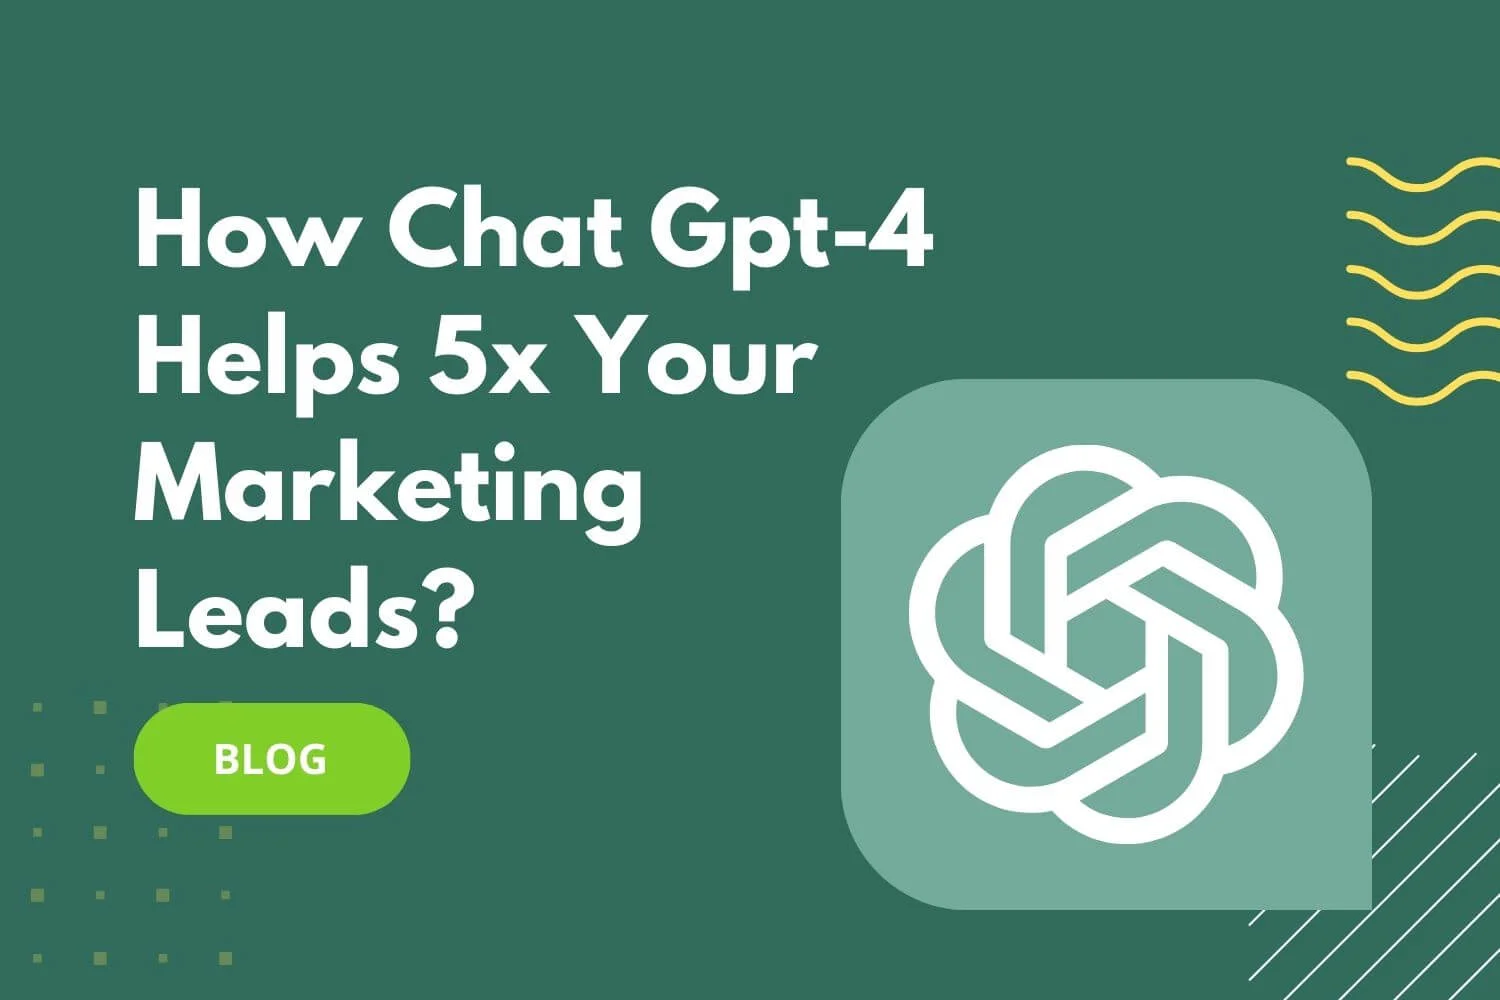 How Chat Gpt-4 Helps 5x Your Marketing Leads